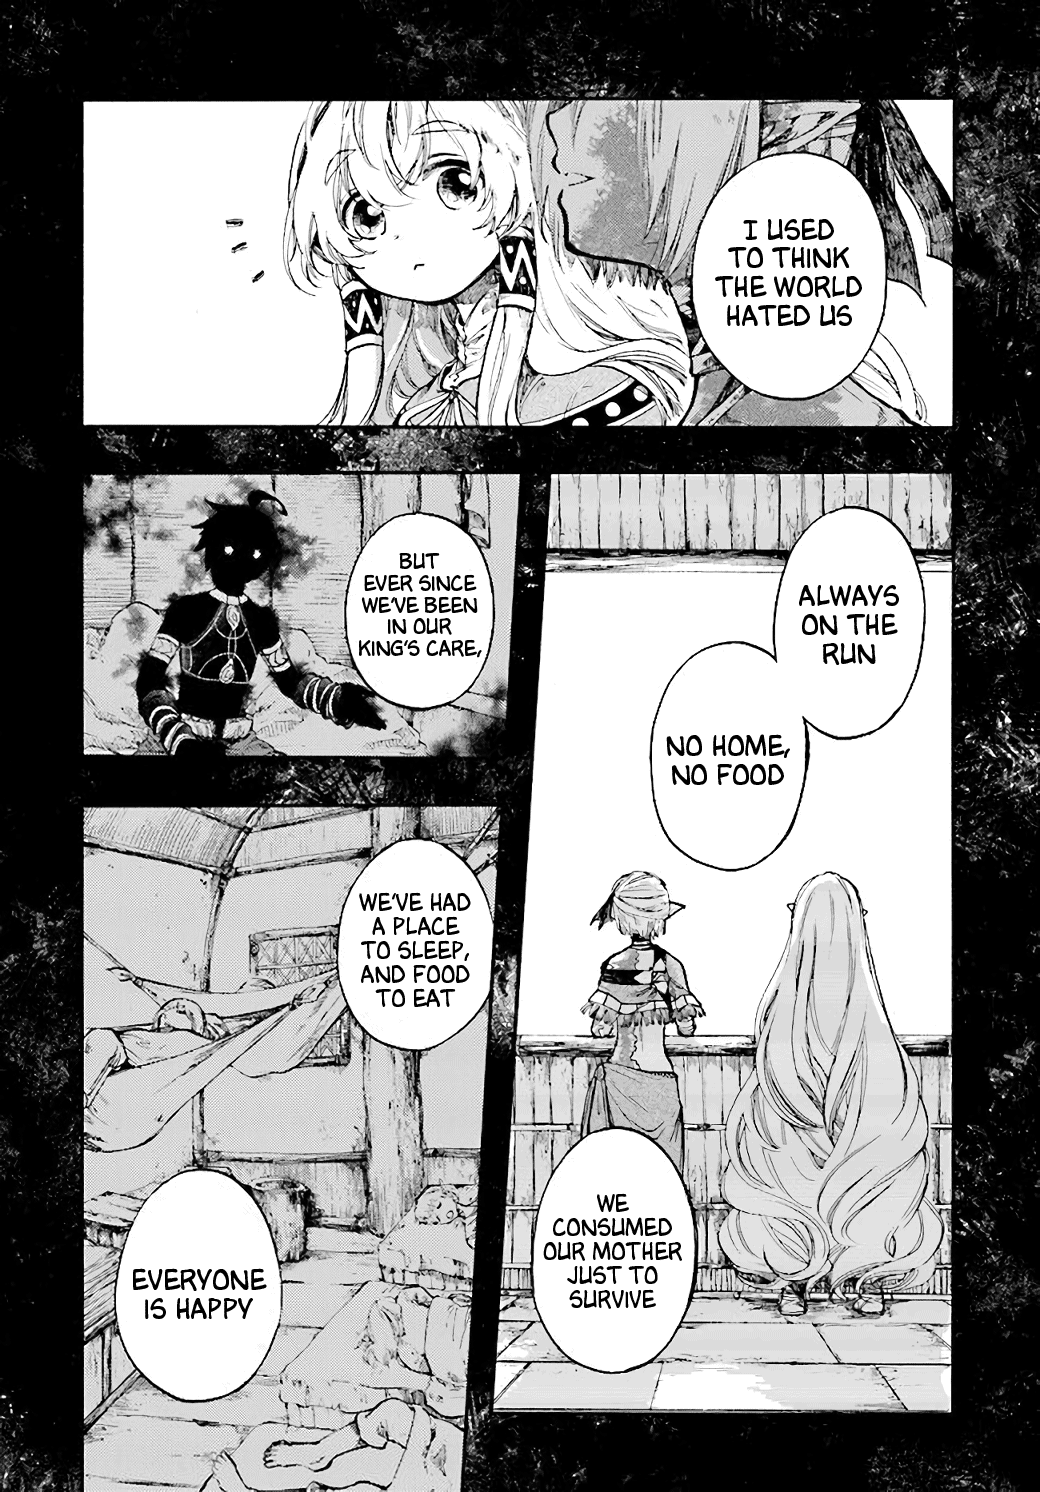 Isekai Apocalypse Mynoghra ~The Conquest Of The World Starts With The Civilization Of Ruin~ - Page 2